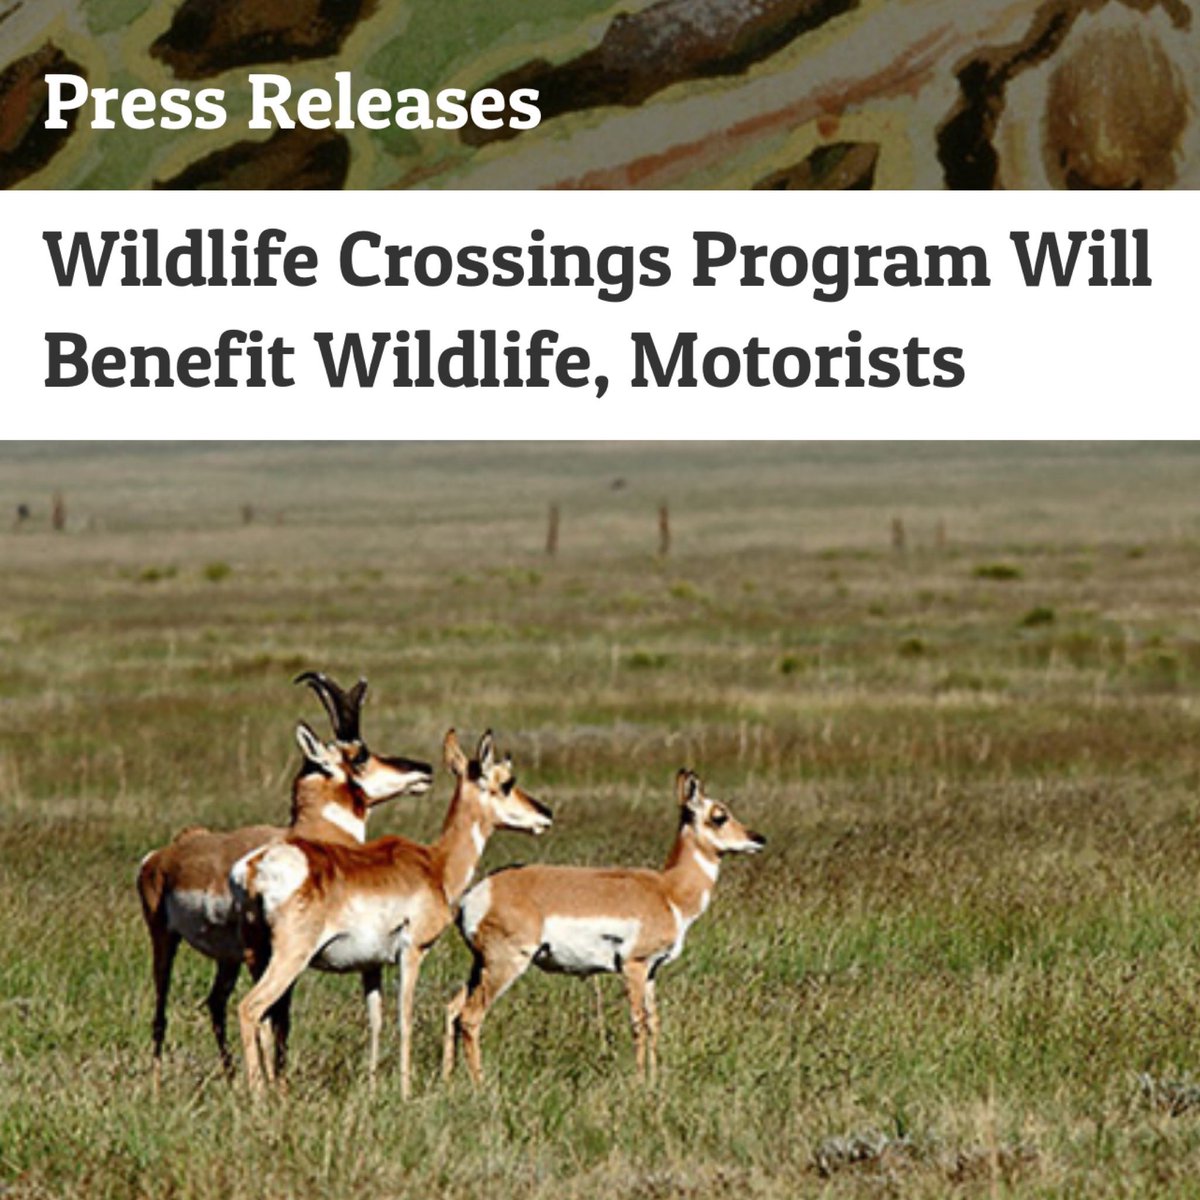 Transportation Secretary @PeteButtigieg made the announcement in #NewMexico, where @NWF’s Jeremy Romero showed him a proposed #WildlifeCrossing project that will be funded by the pilot program. Learn more 👉🏽 nwf.org/Latest-News/Pr… @OurPublicLands @NMWildlife